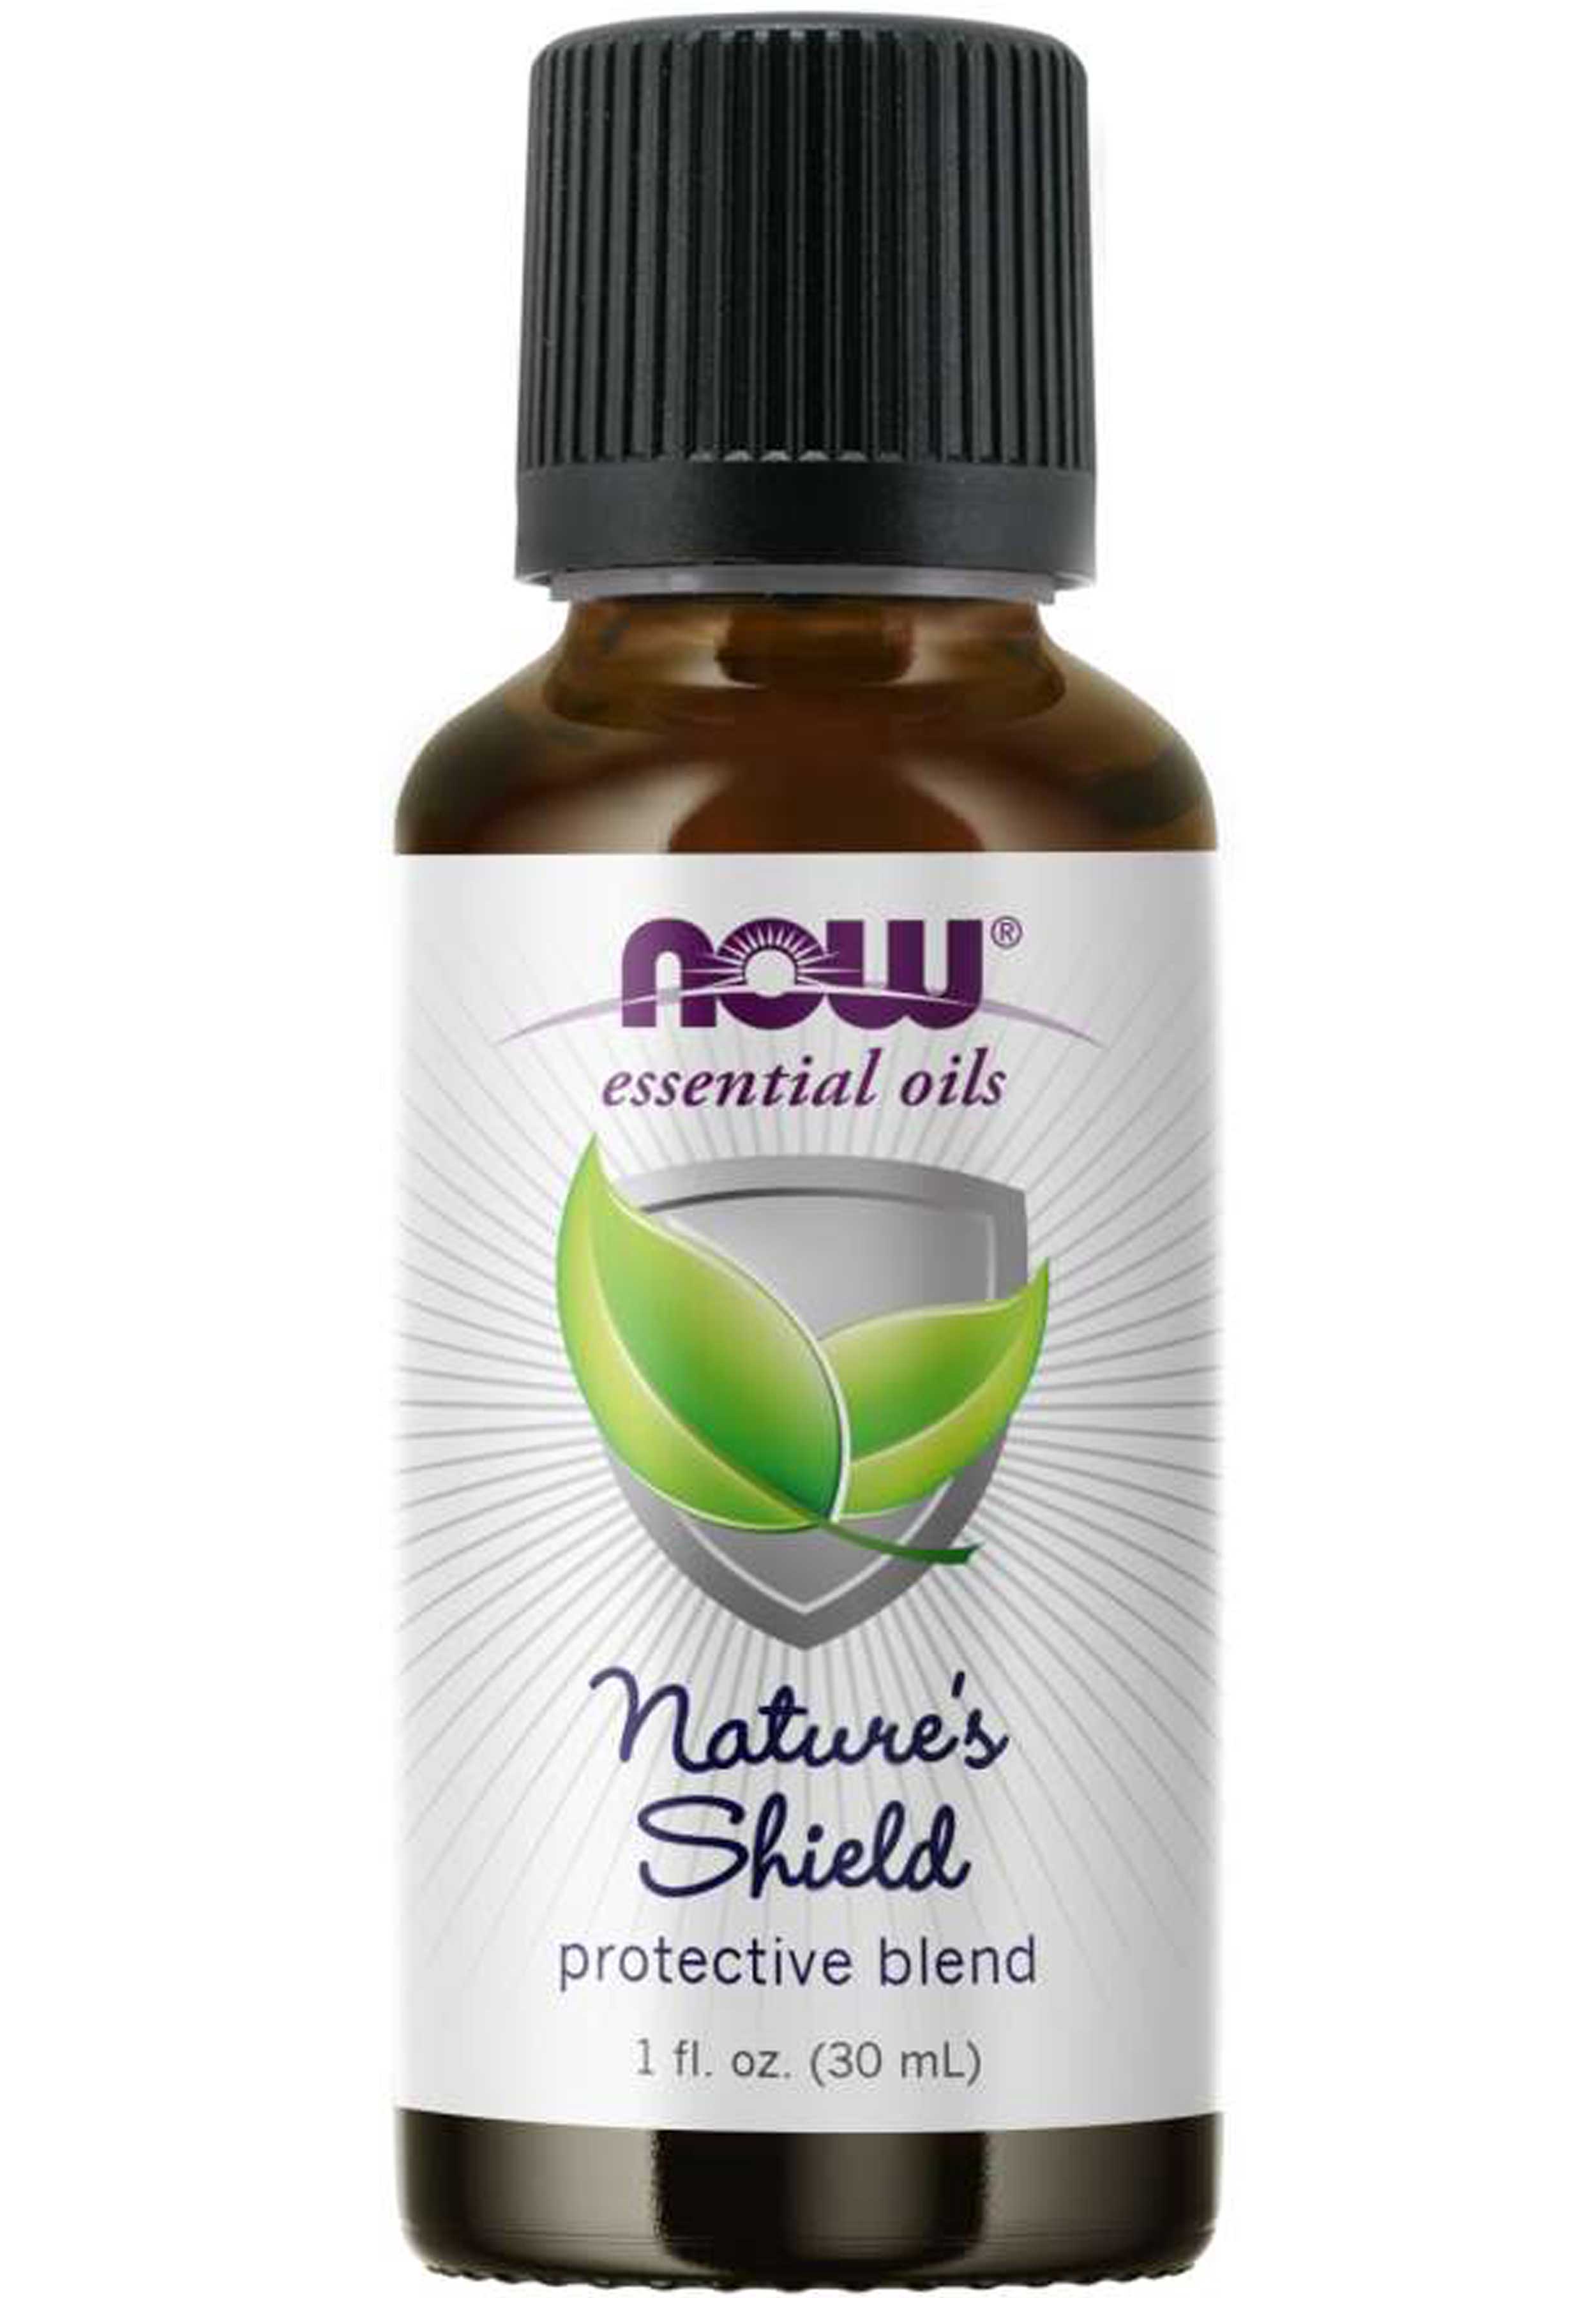 NOW Essential Oils Nature's Shield Blend